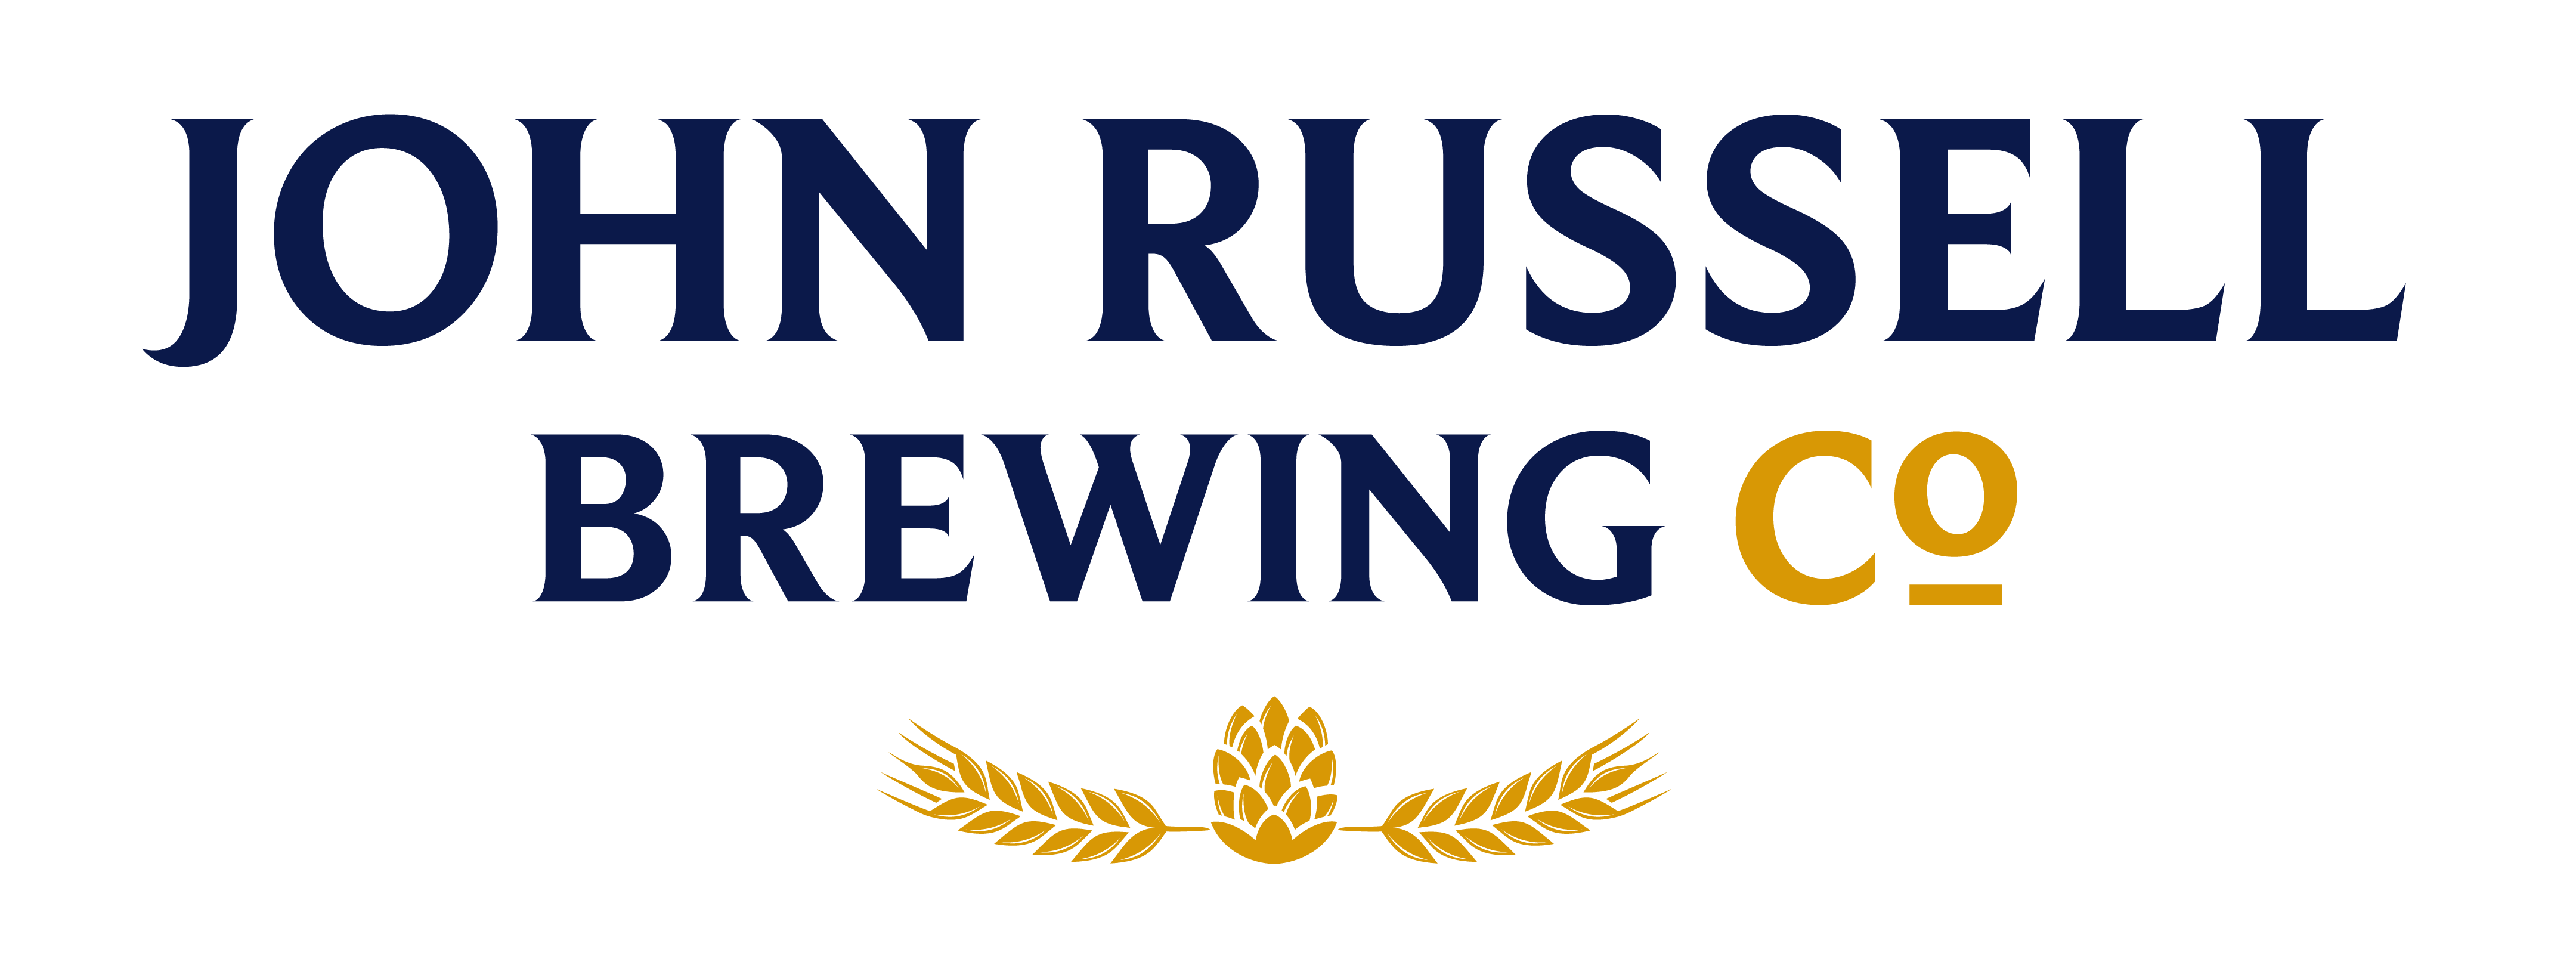 John Russell Brewing Co Logo Text Only